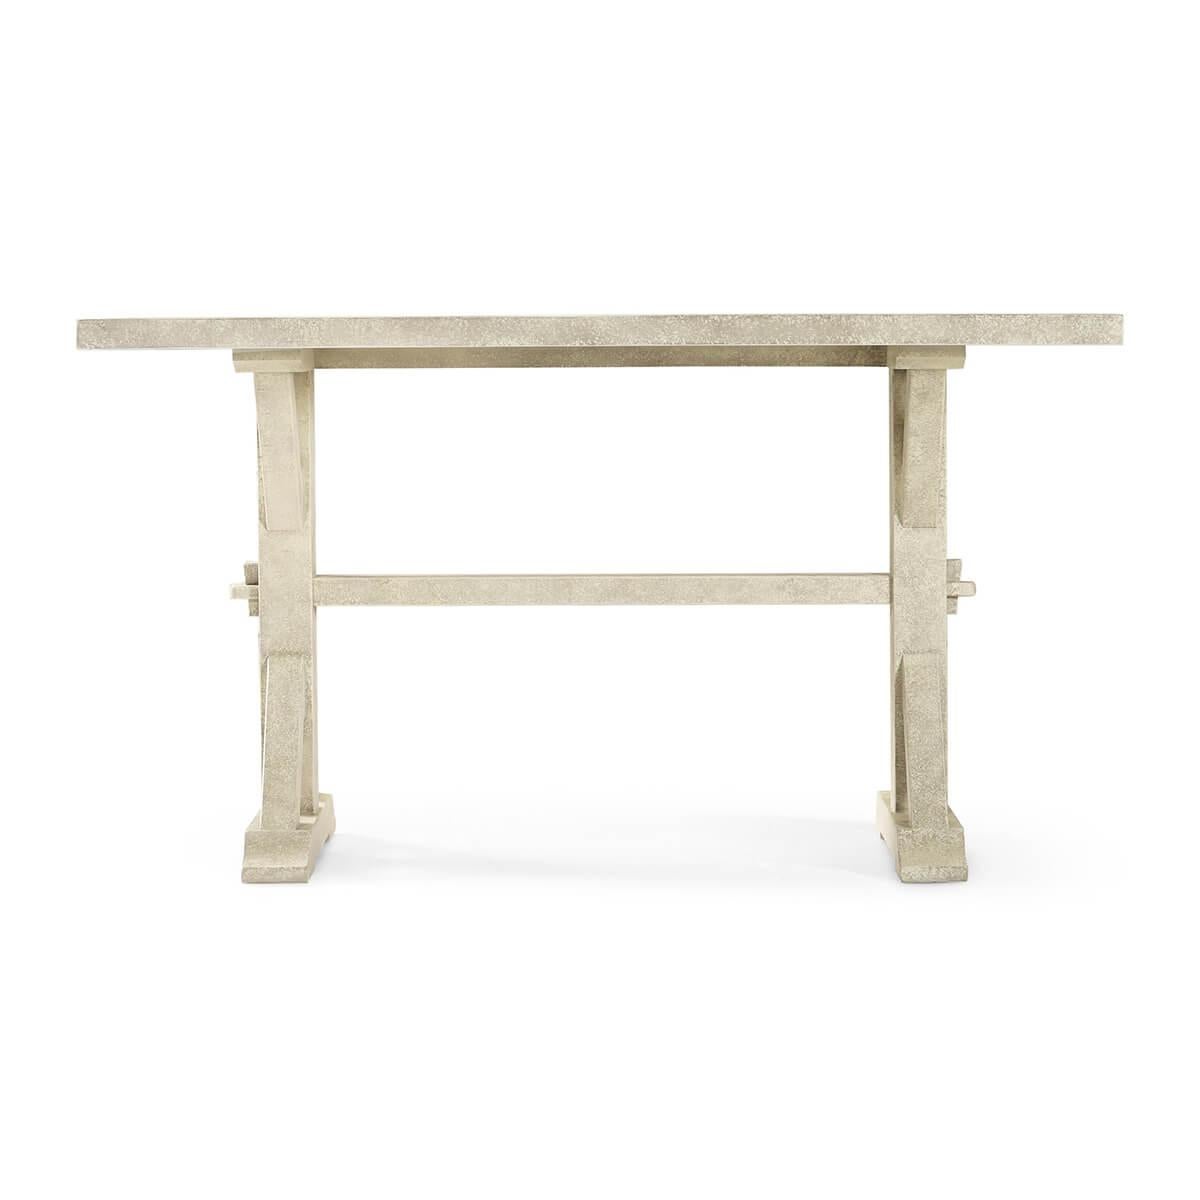 Rustic country dining table with a solid distressed top, the whitewash finish shows exposed saw marks and the trestle end base with mortice and tenon joints to the stretcher and supports.

Dimensions: 54